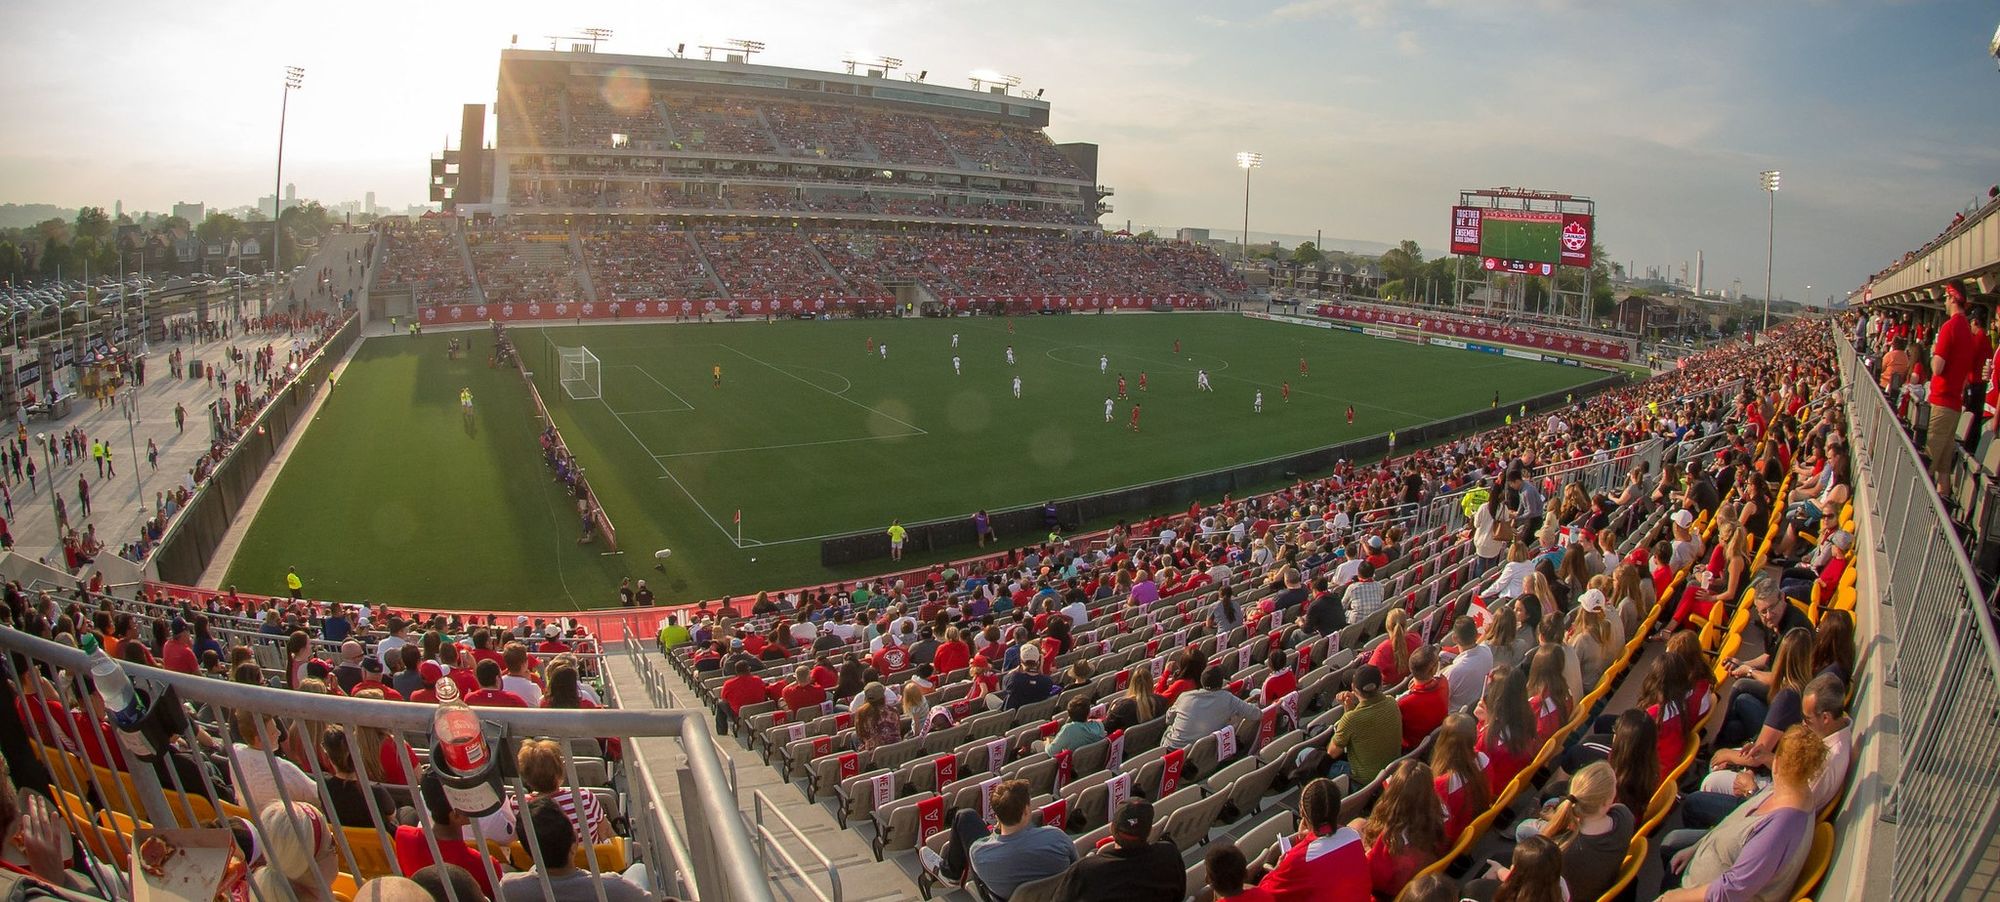 CanMNT Talk: World Cup qualifier vs. U.S. to be held in Hamilton